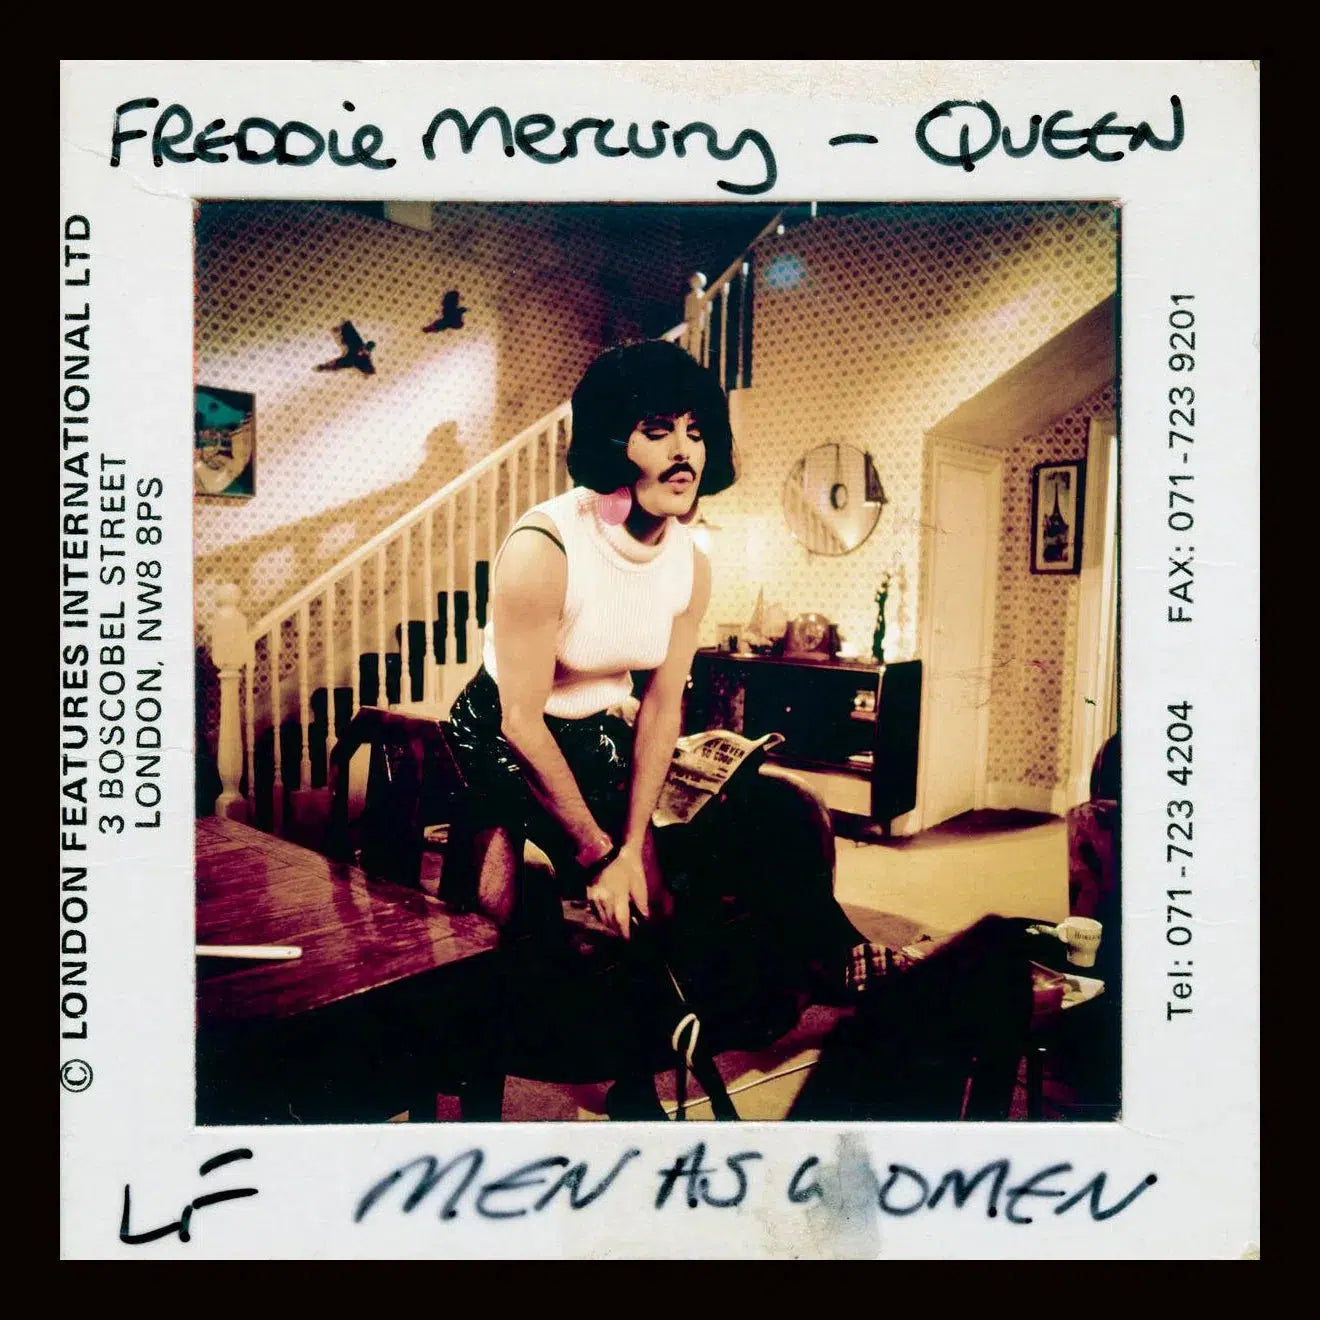 Freddy Mercury - Slide 3, from The Wild Ones collection-PurePhoto